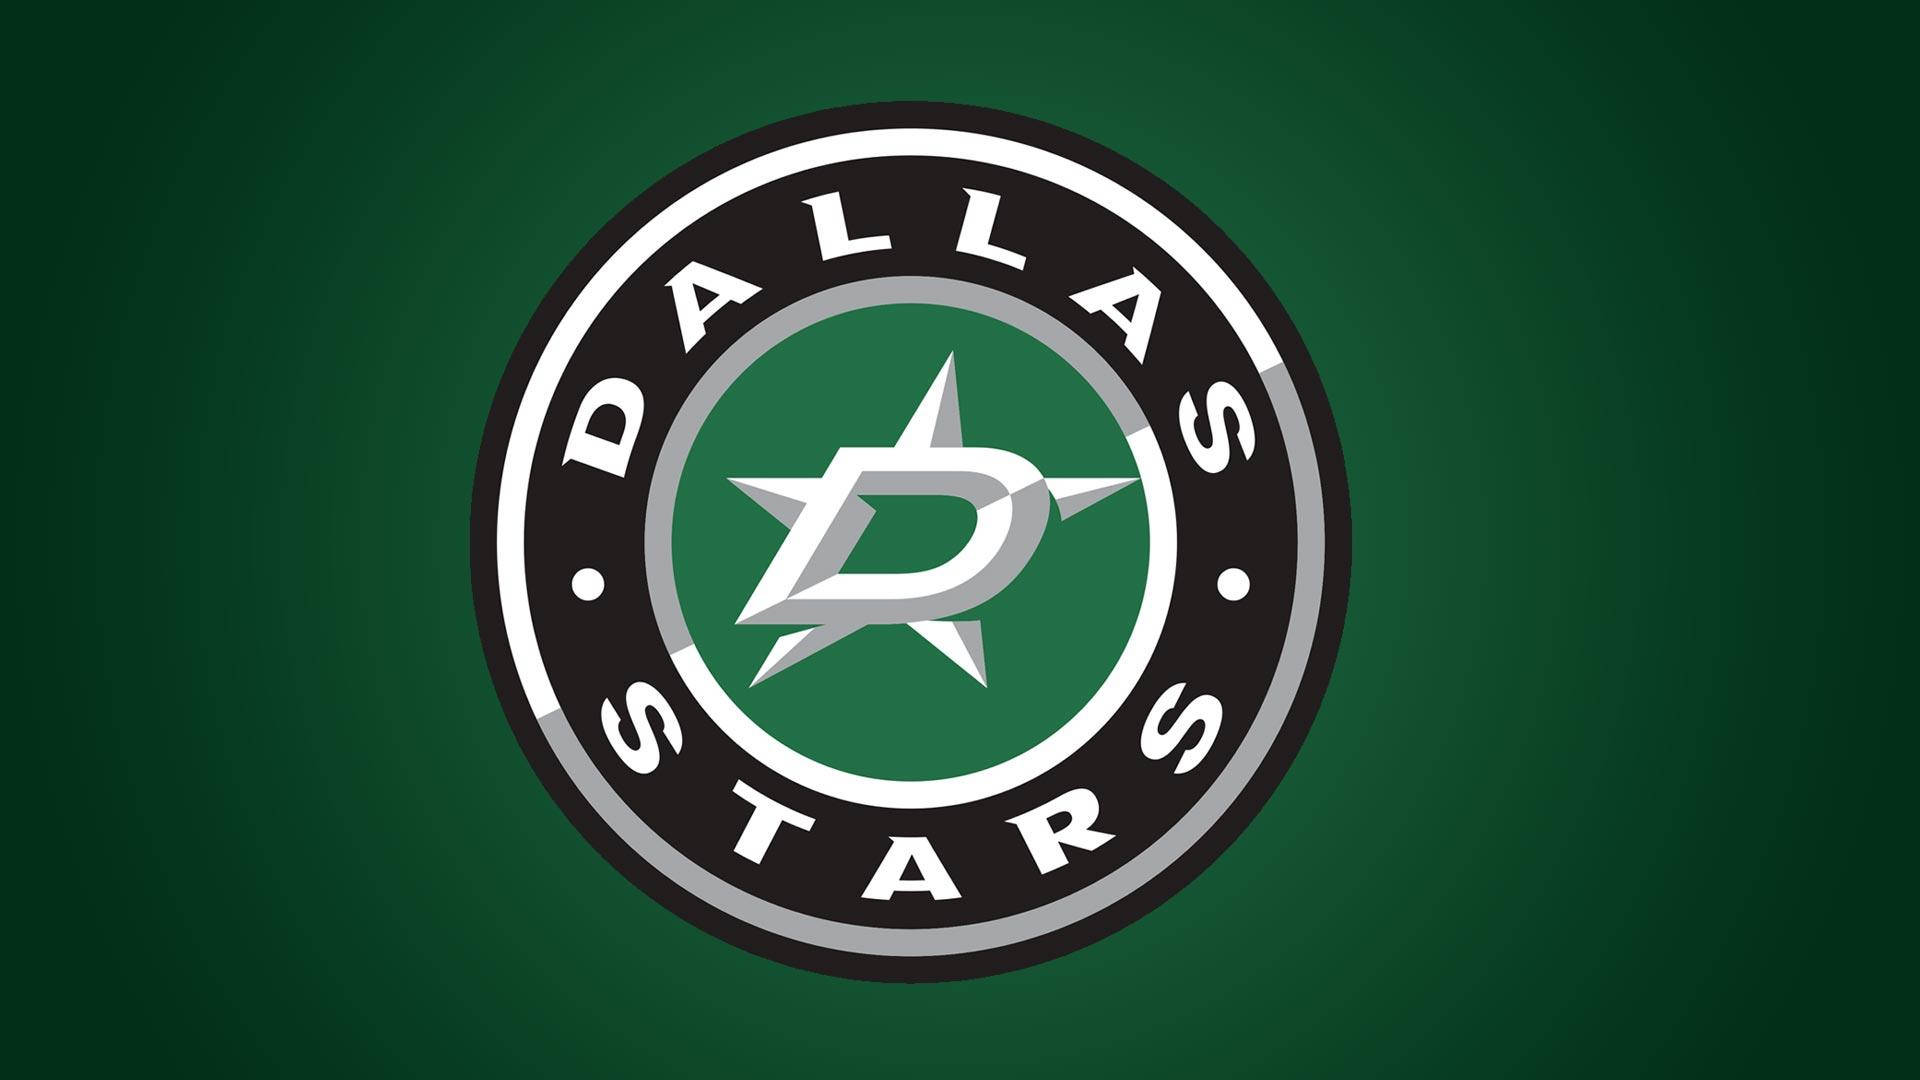 300+] Dallas Stars Pictures | Wallpapers.com